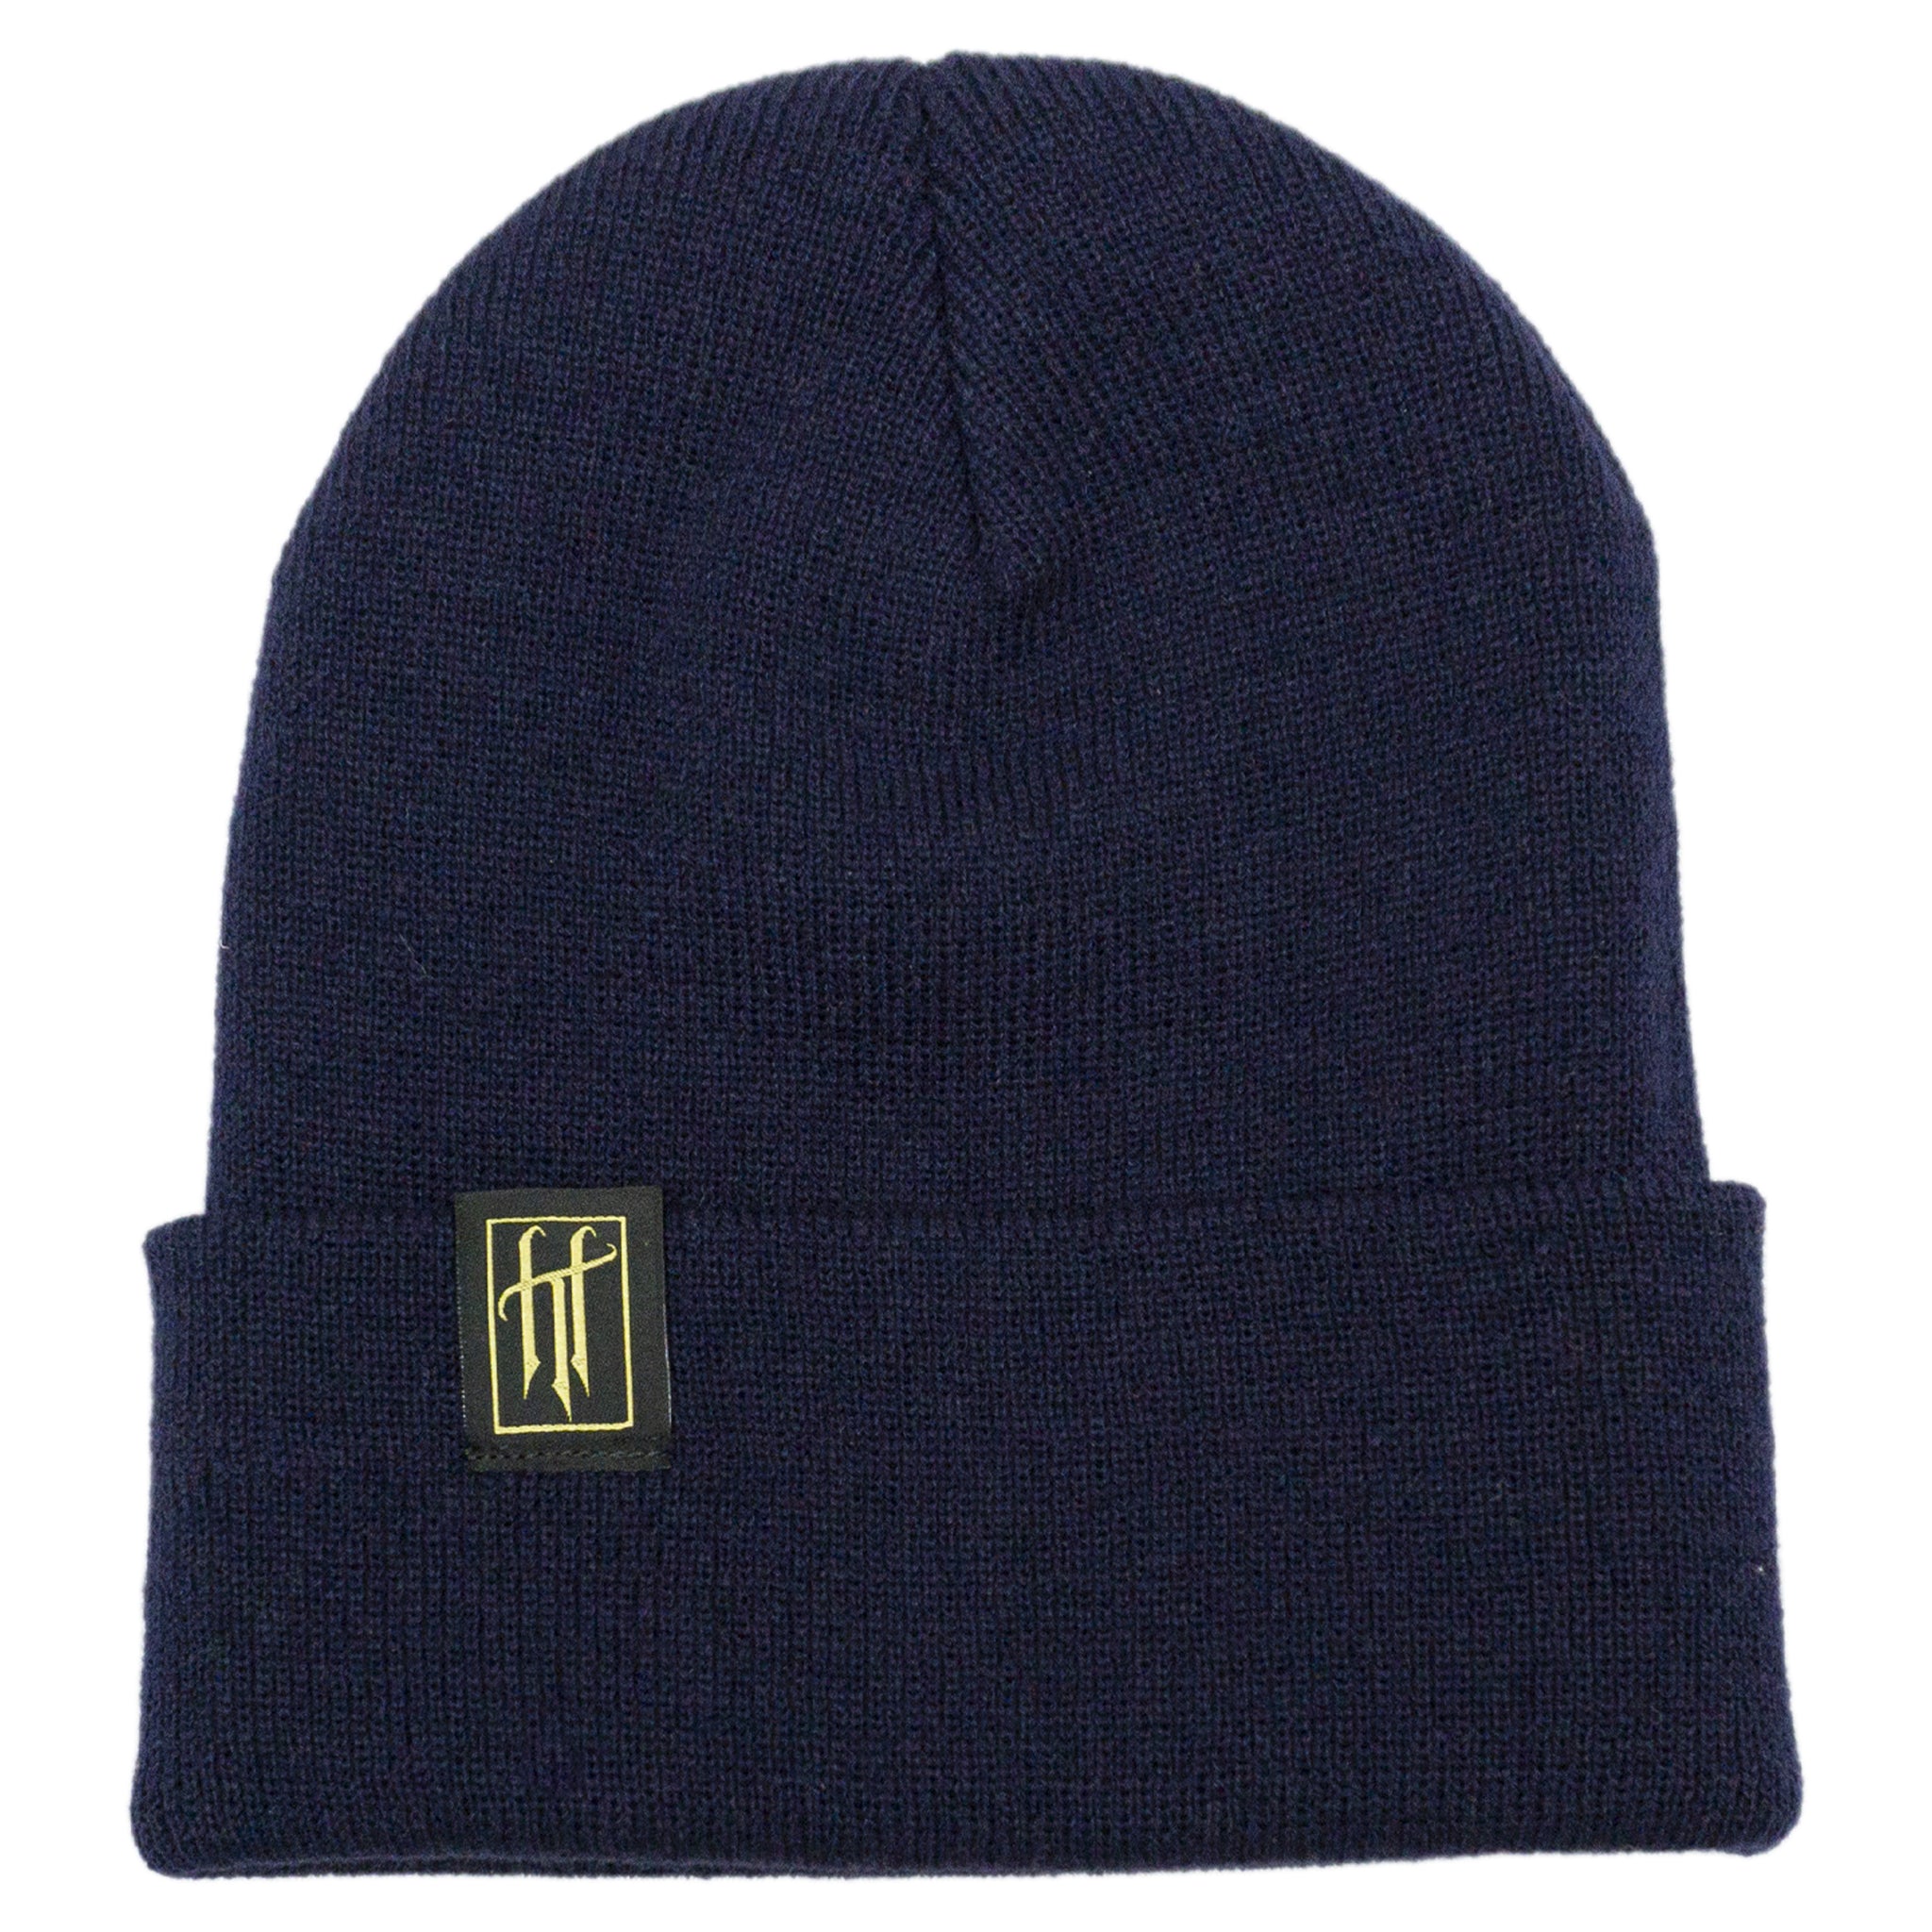 The New Classic Beanie (Navy)